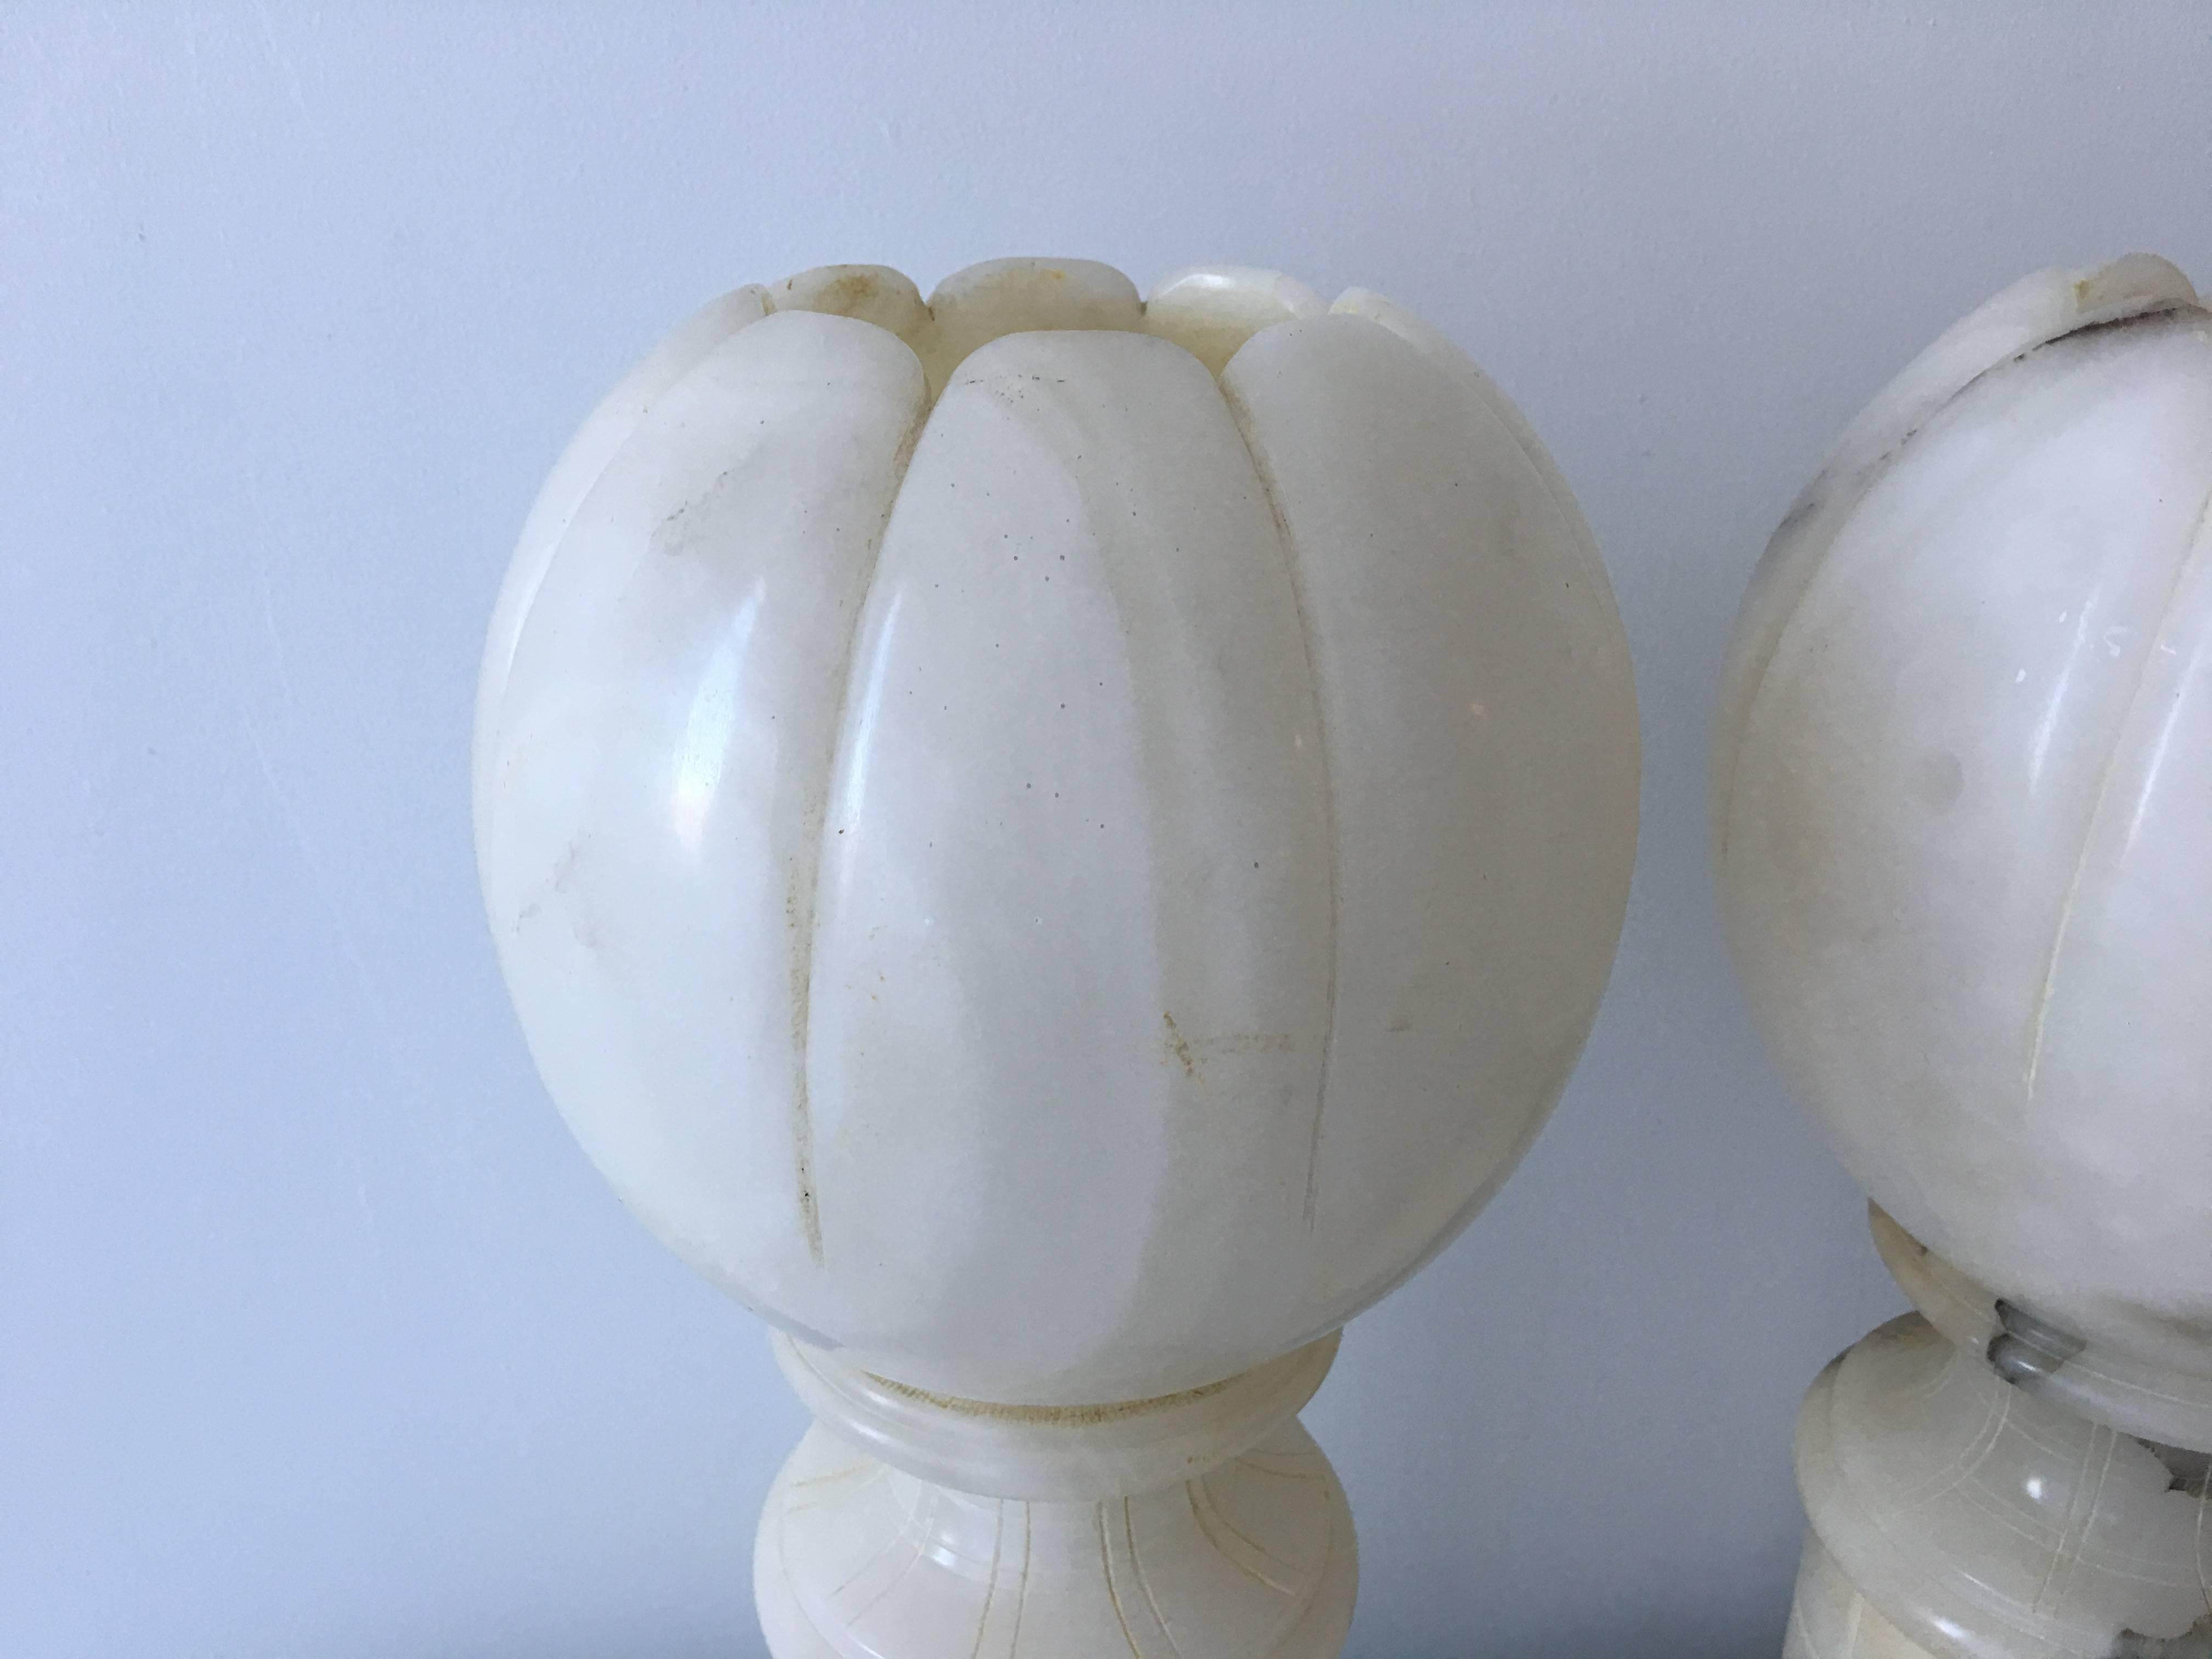 Offered is an exquisite pair of 1920s Art Deco, solid alabaster urn lamps in the shape of orbs. These are absolutely stunning, giving off great ambient lighting. Wiring is in excellent condition.